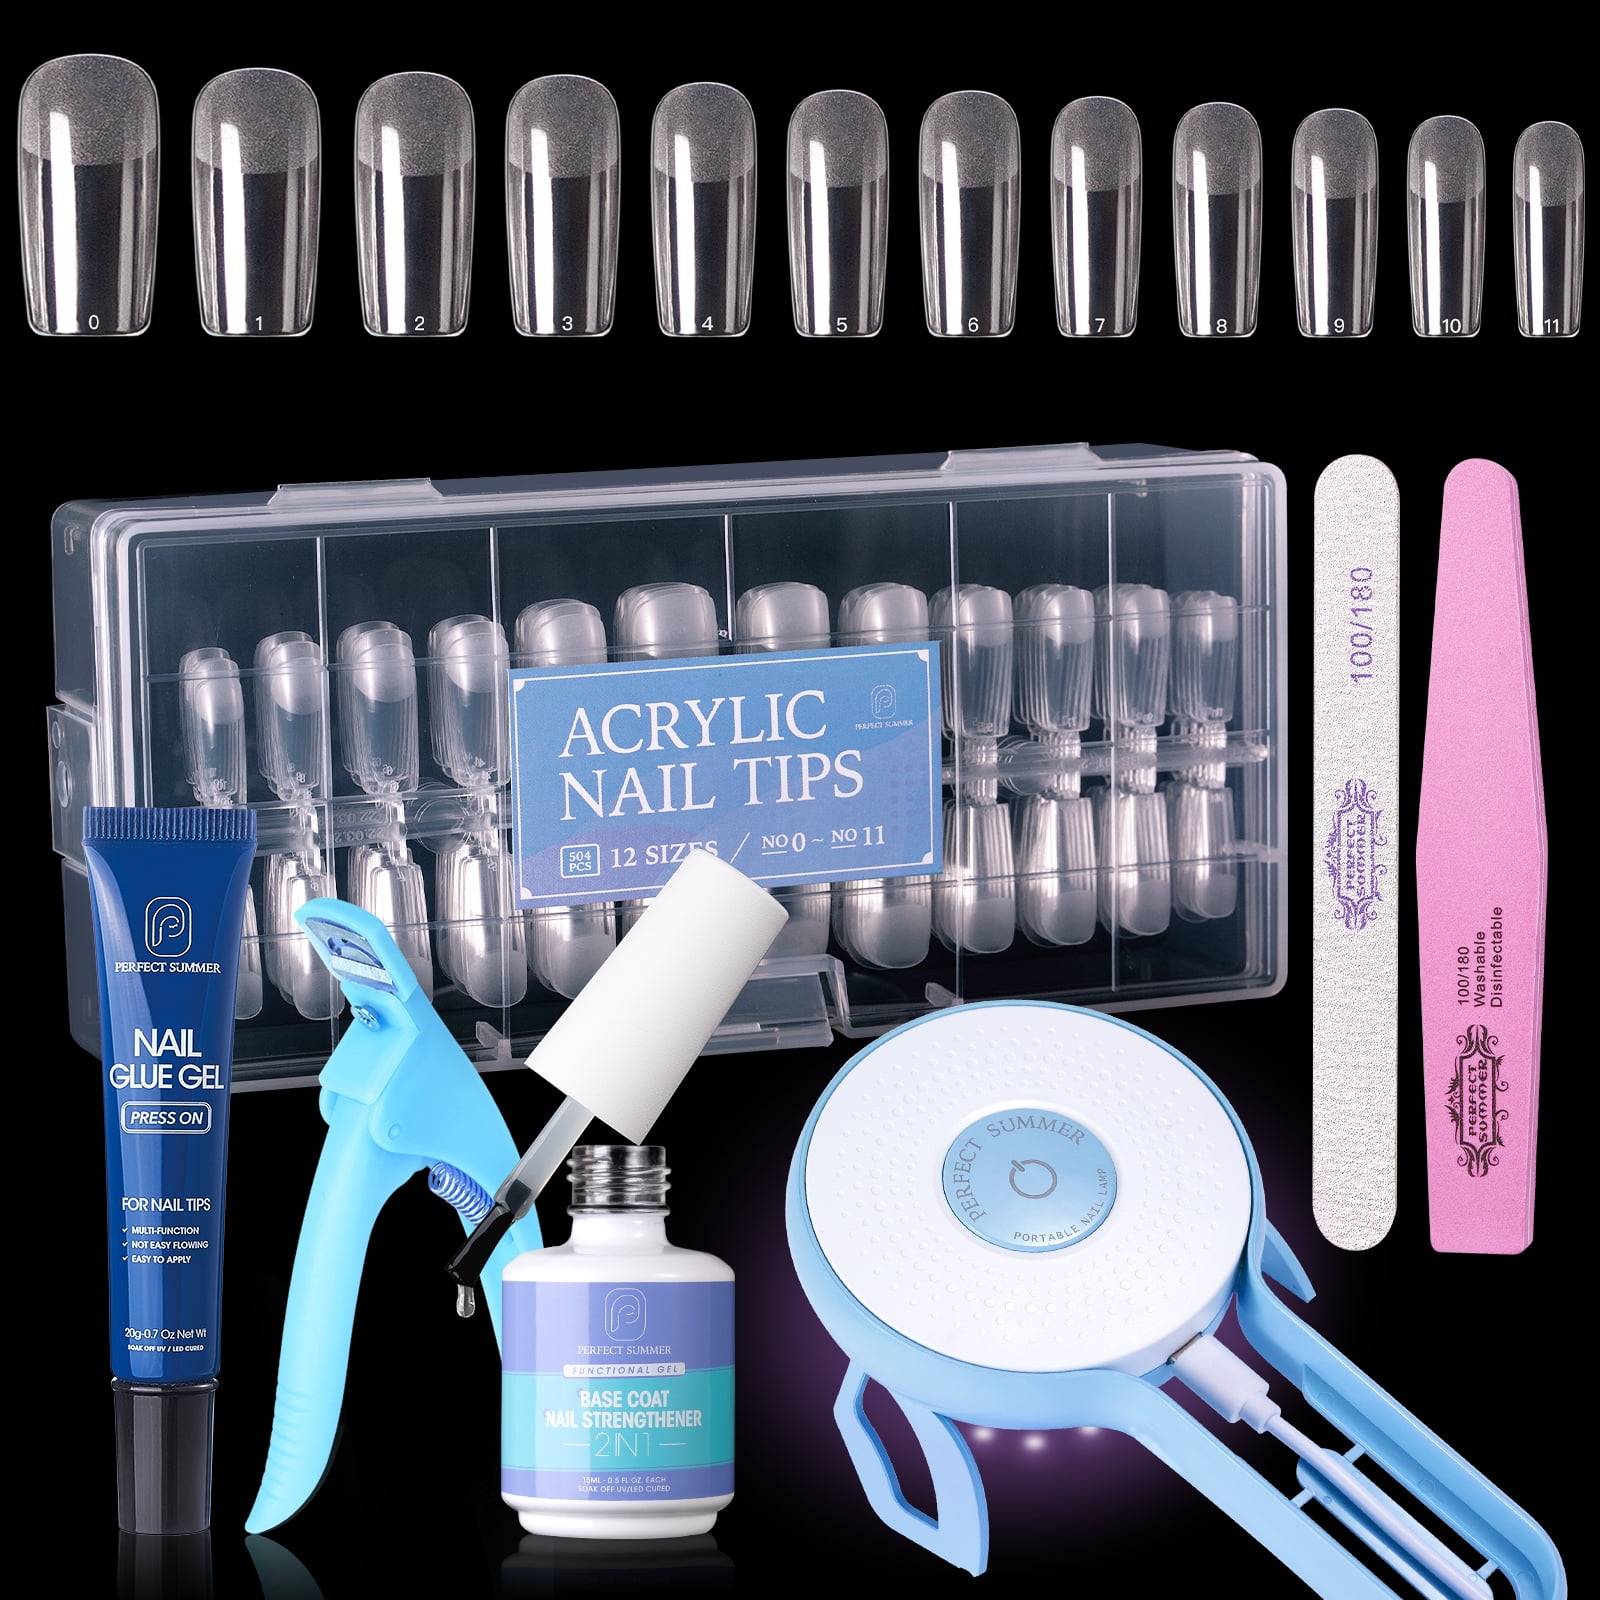  Cooserry Nail Tips and Glue Gel Kit with UV light - Gel  Extension Nail Kit with 1000 Pcs C Curve Clear French Ballerina Acrylic  Fake Nails, 4 in 1 20ml Nail